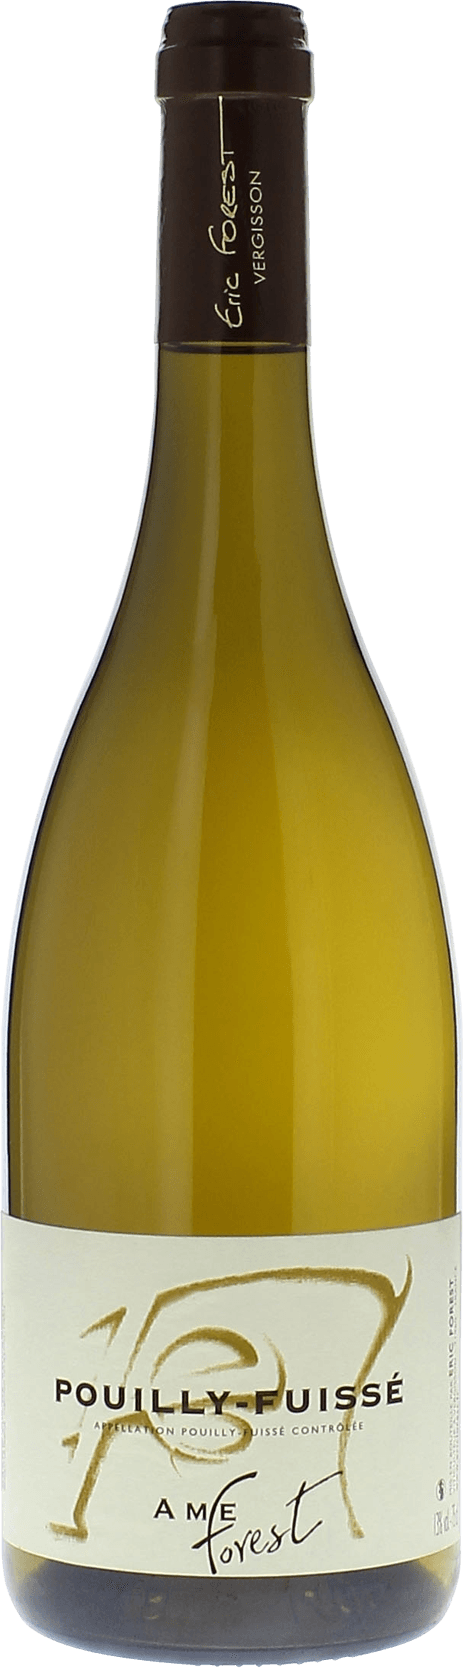 Pouilly fuiss ame 2015 Domaine Eric Forest, Bourgogne blanc